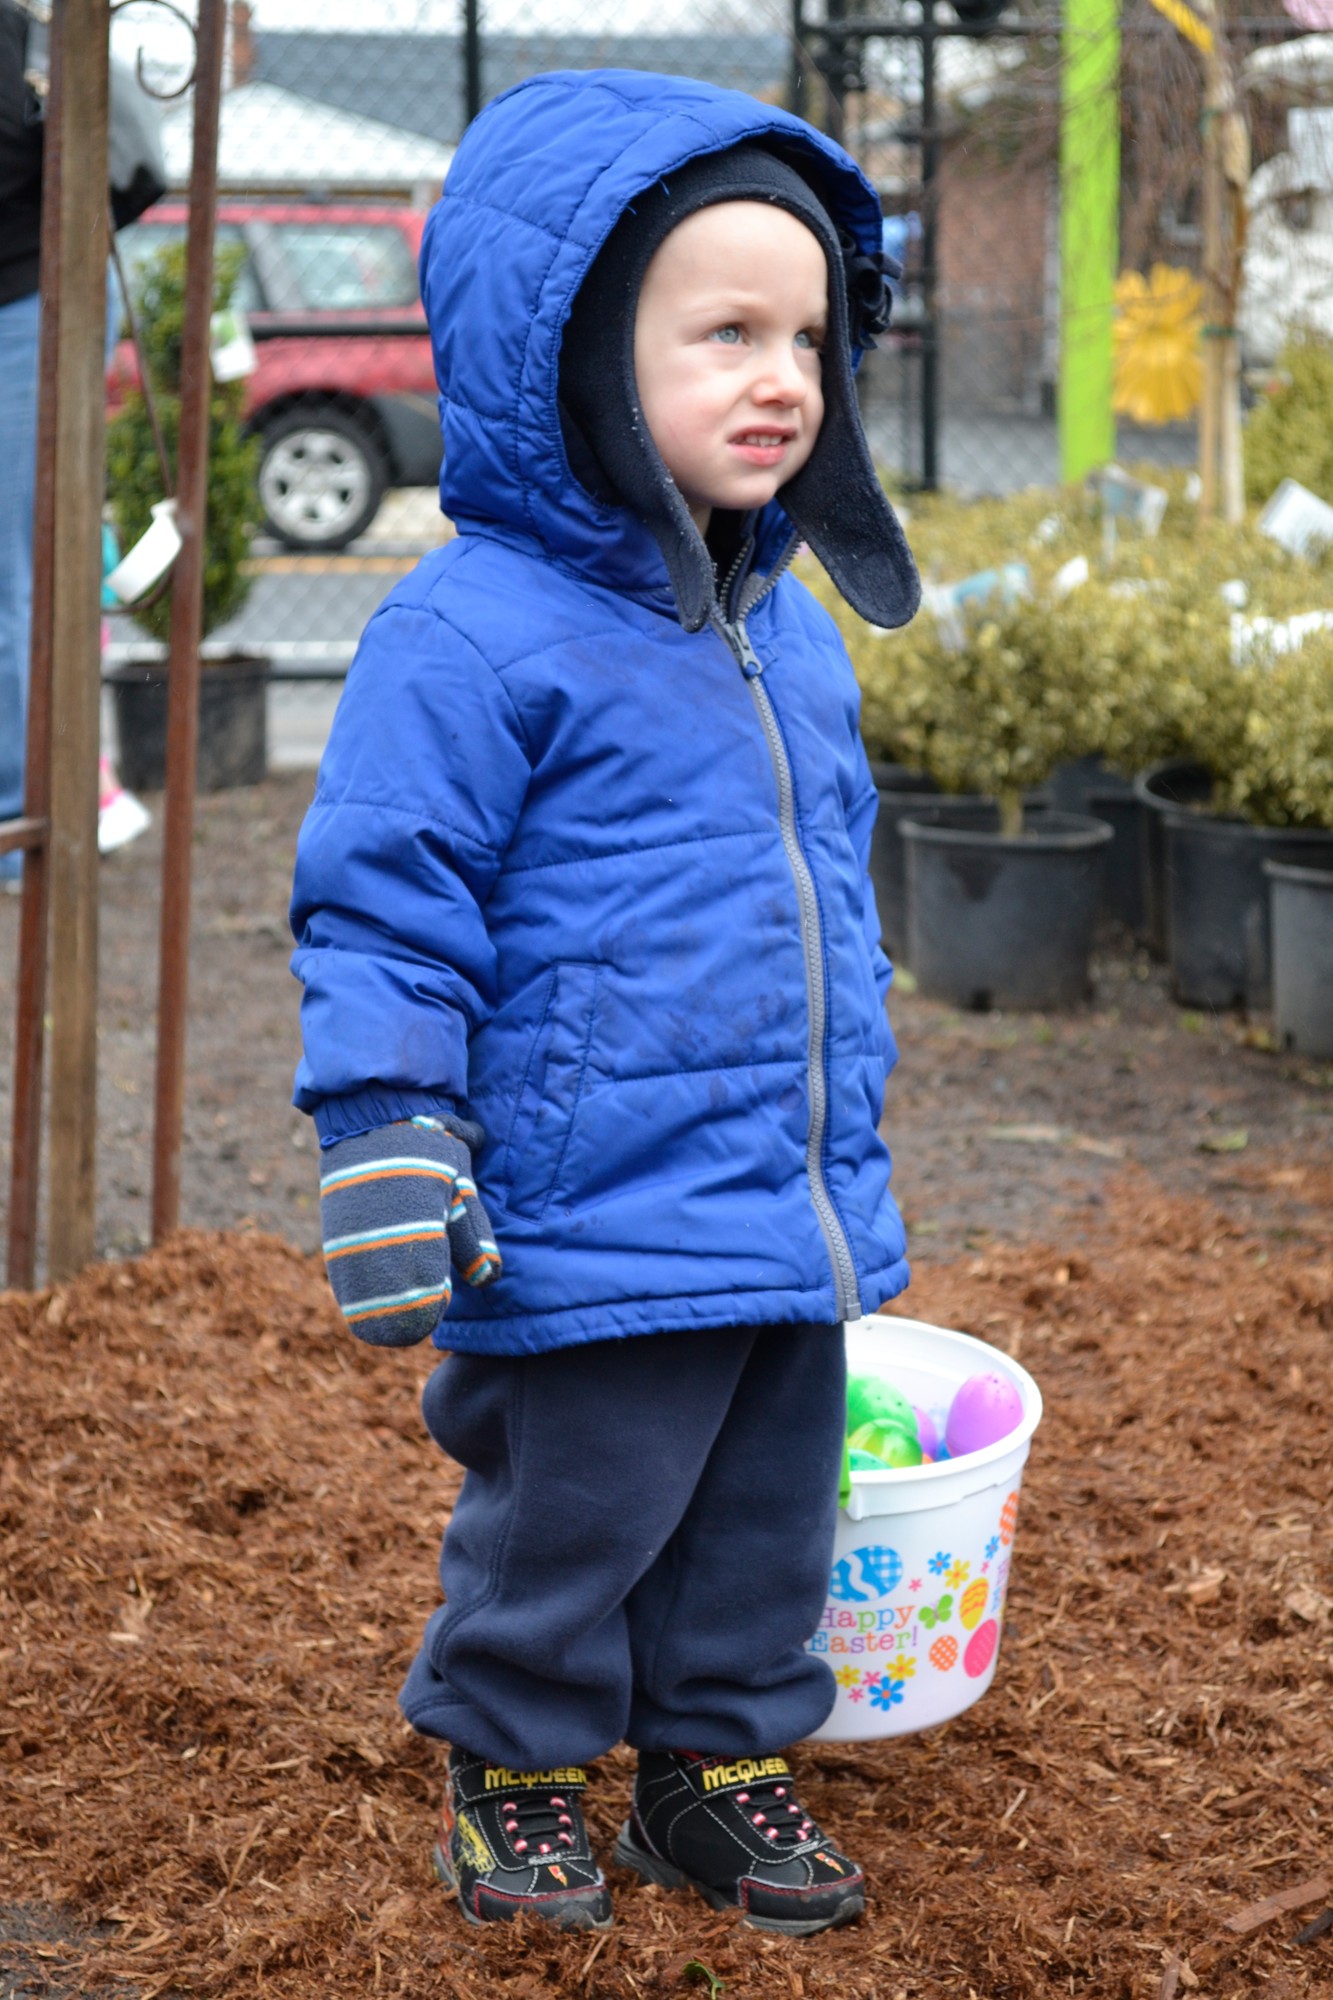 Jack Quattrochi was bundled up and ready to find some eggs.